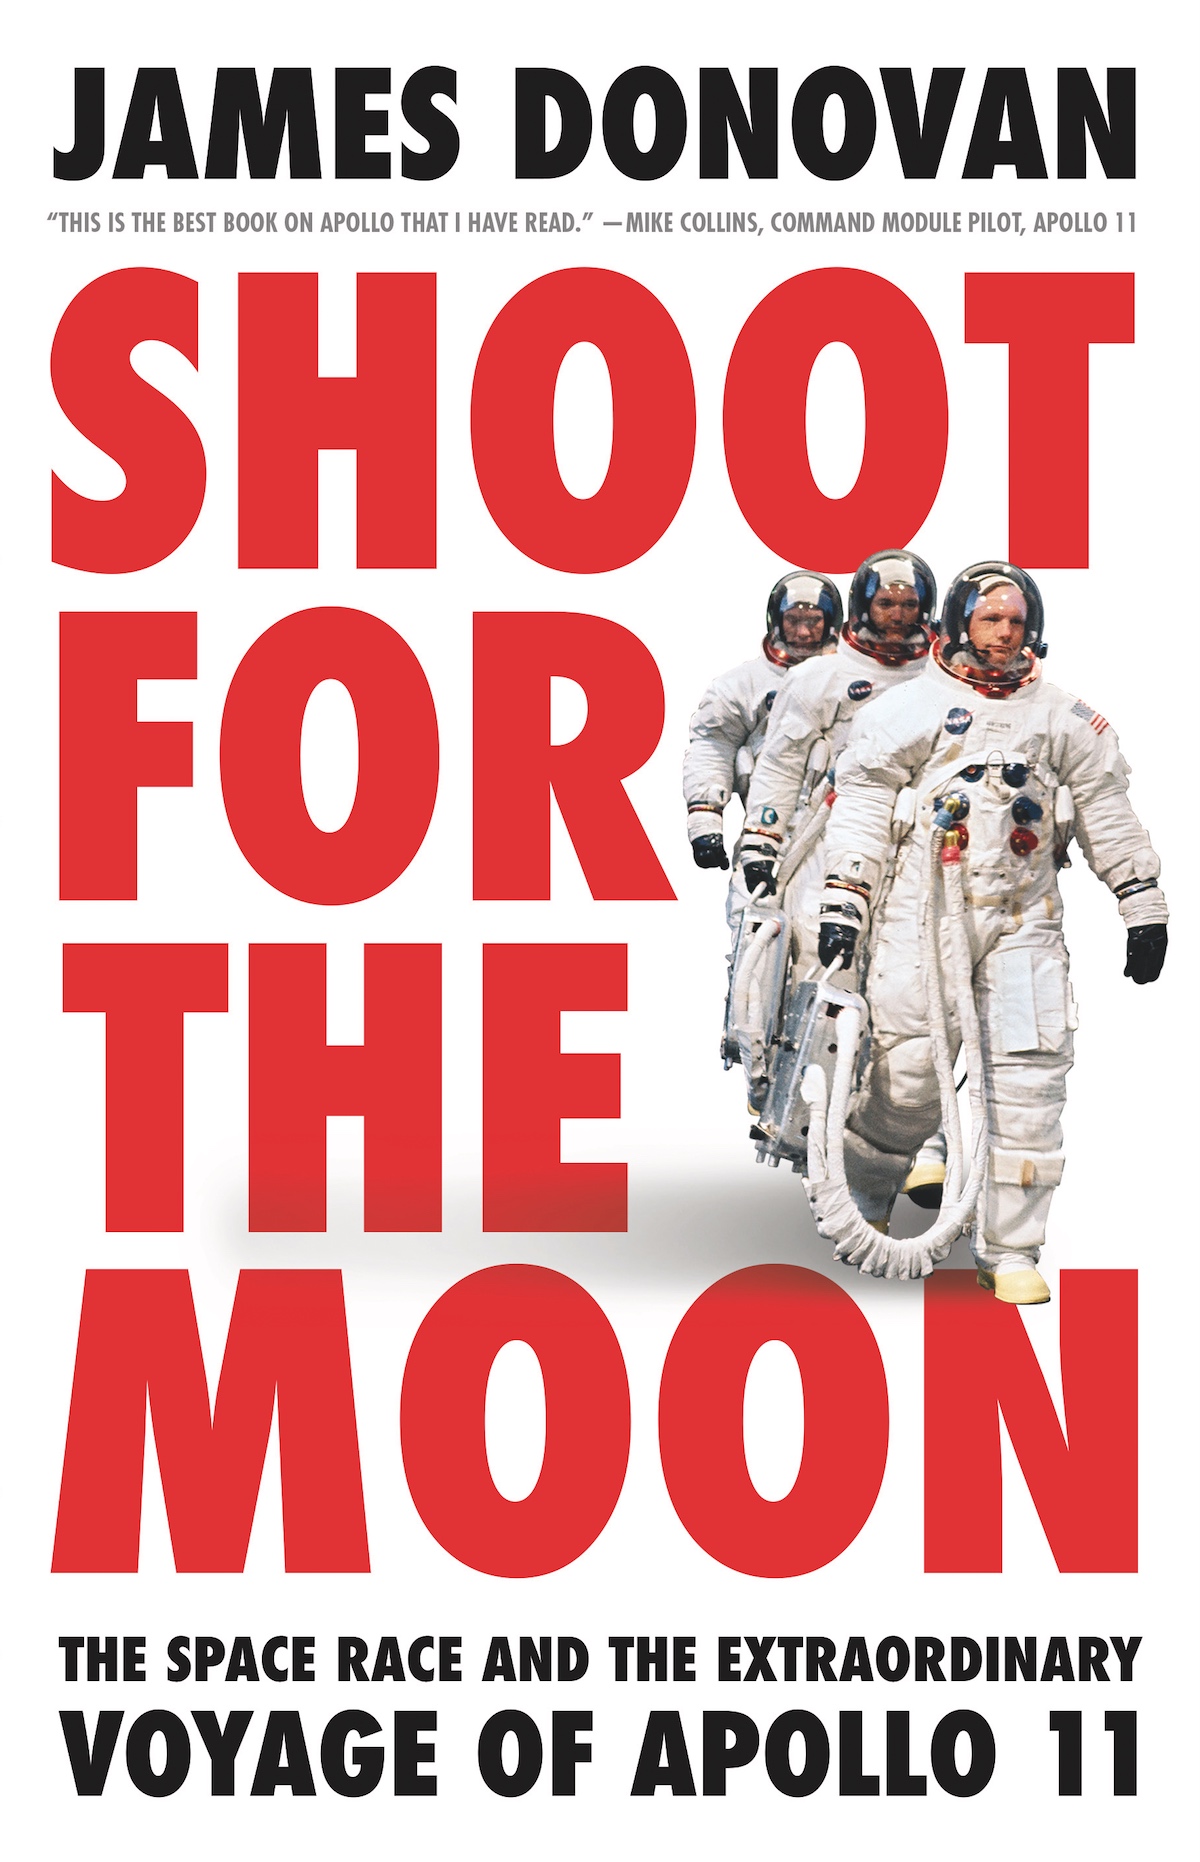 Shoot for the Moon: The Space Race and the Extraordinary Voyage of Apollo 11 by James Donovan